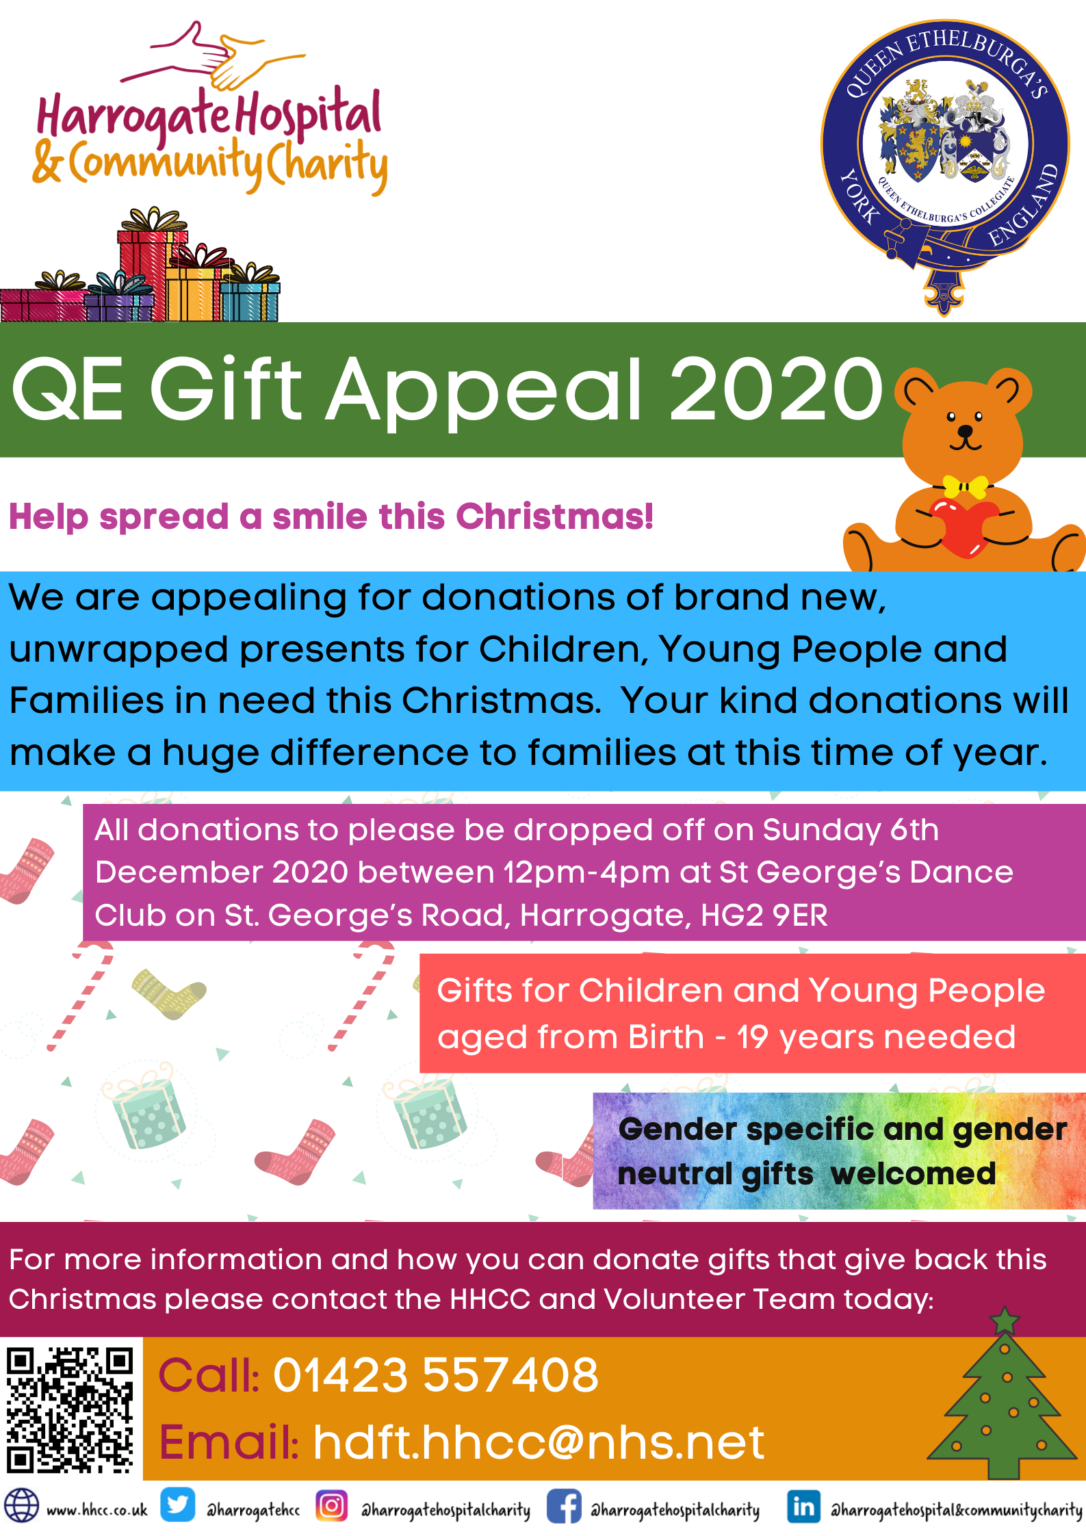 Christmas gift appeal to support children, young people and families